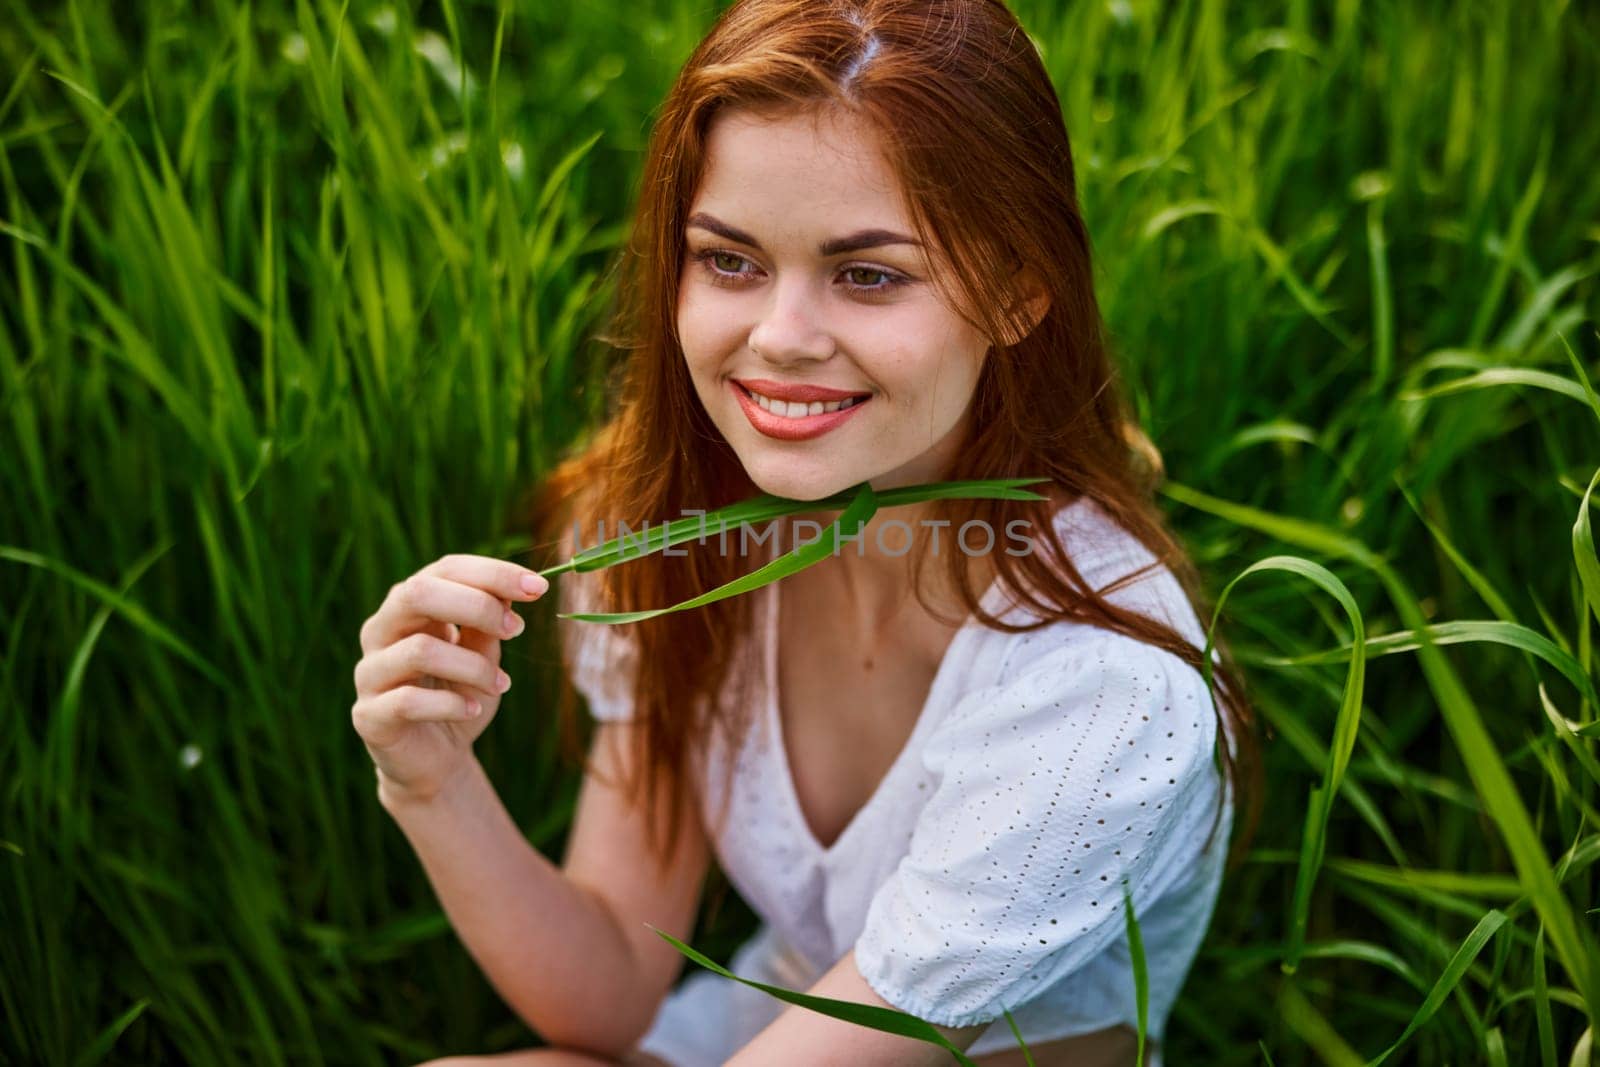 portrait of a happy, laughing woman sitting in tall grass in a field. High quality photo